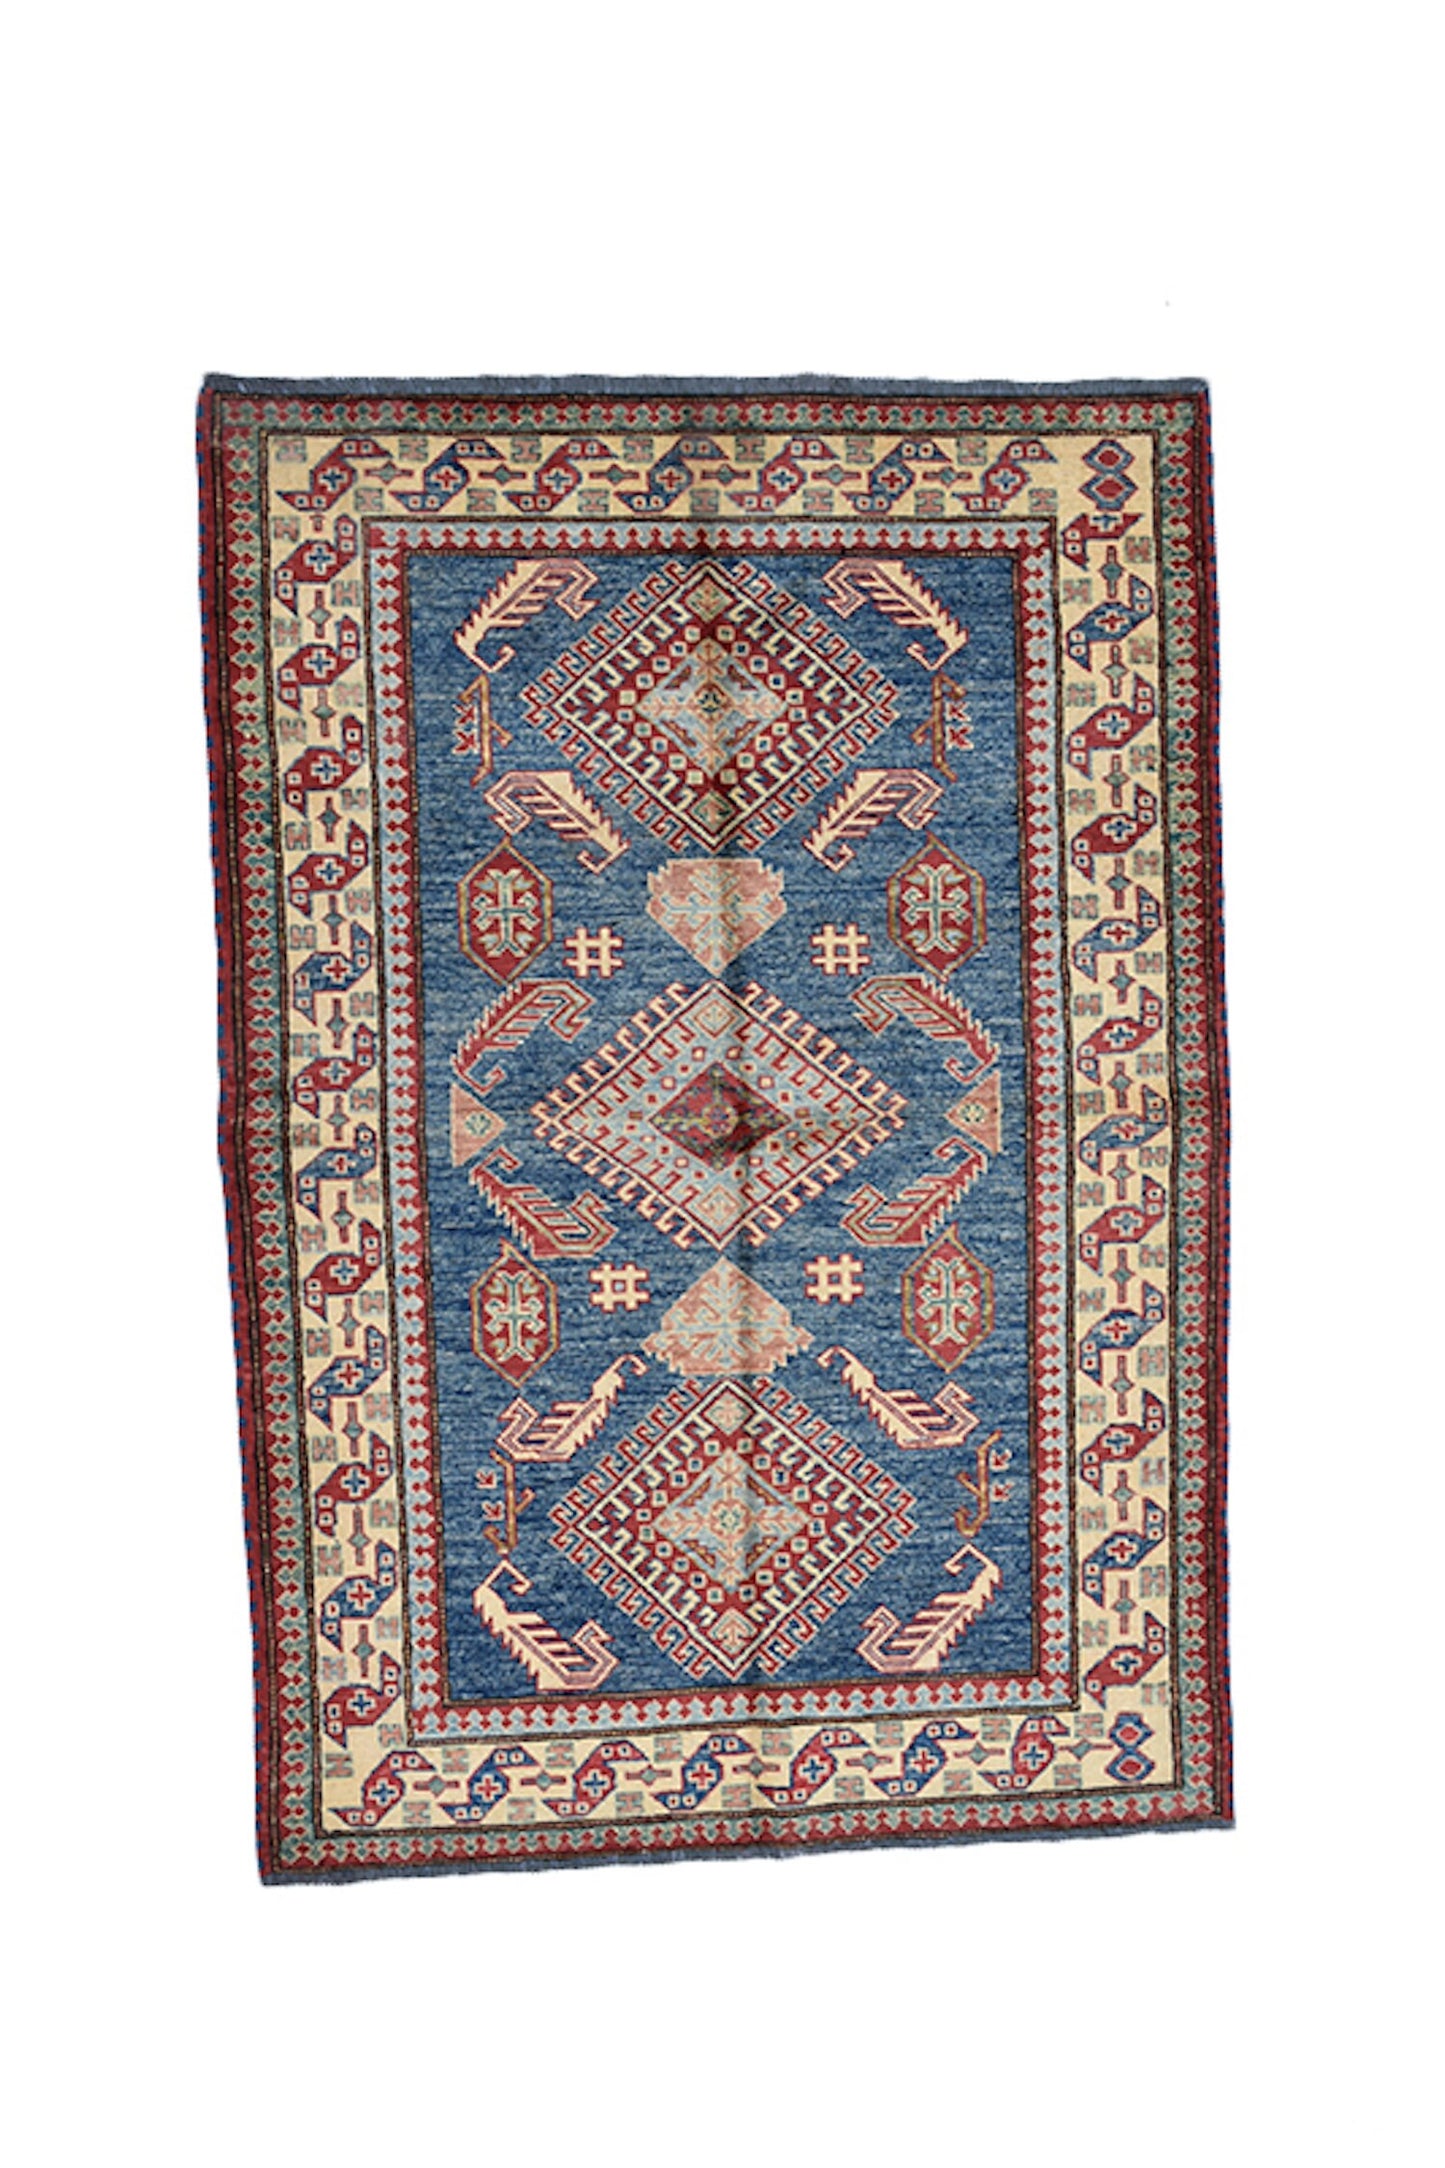 Tribal Area Rug 3 x 5 Hand Knotted Blue with Beige border made with Wool | Rustic Home Decor Style